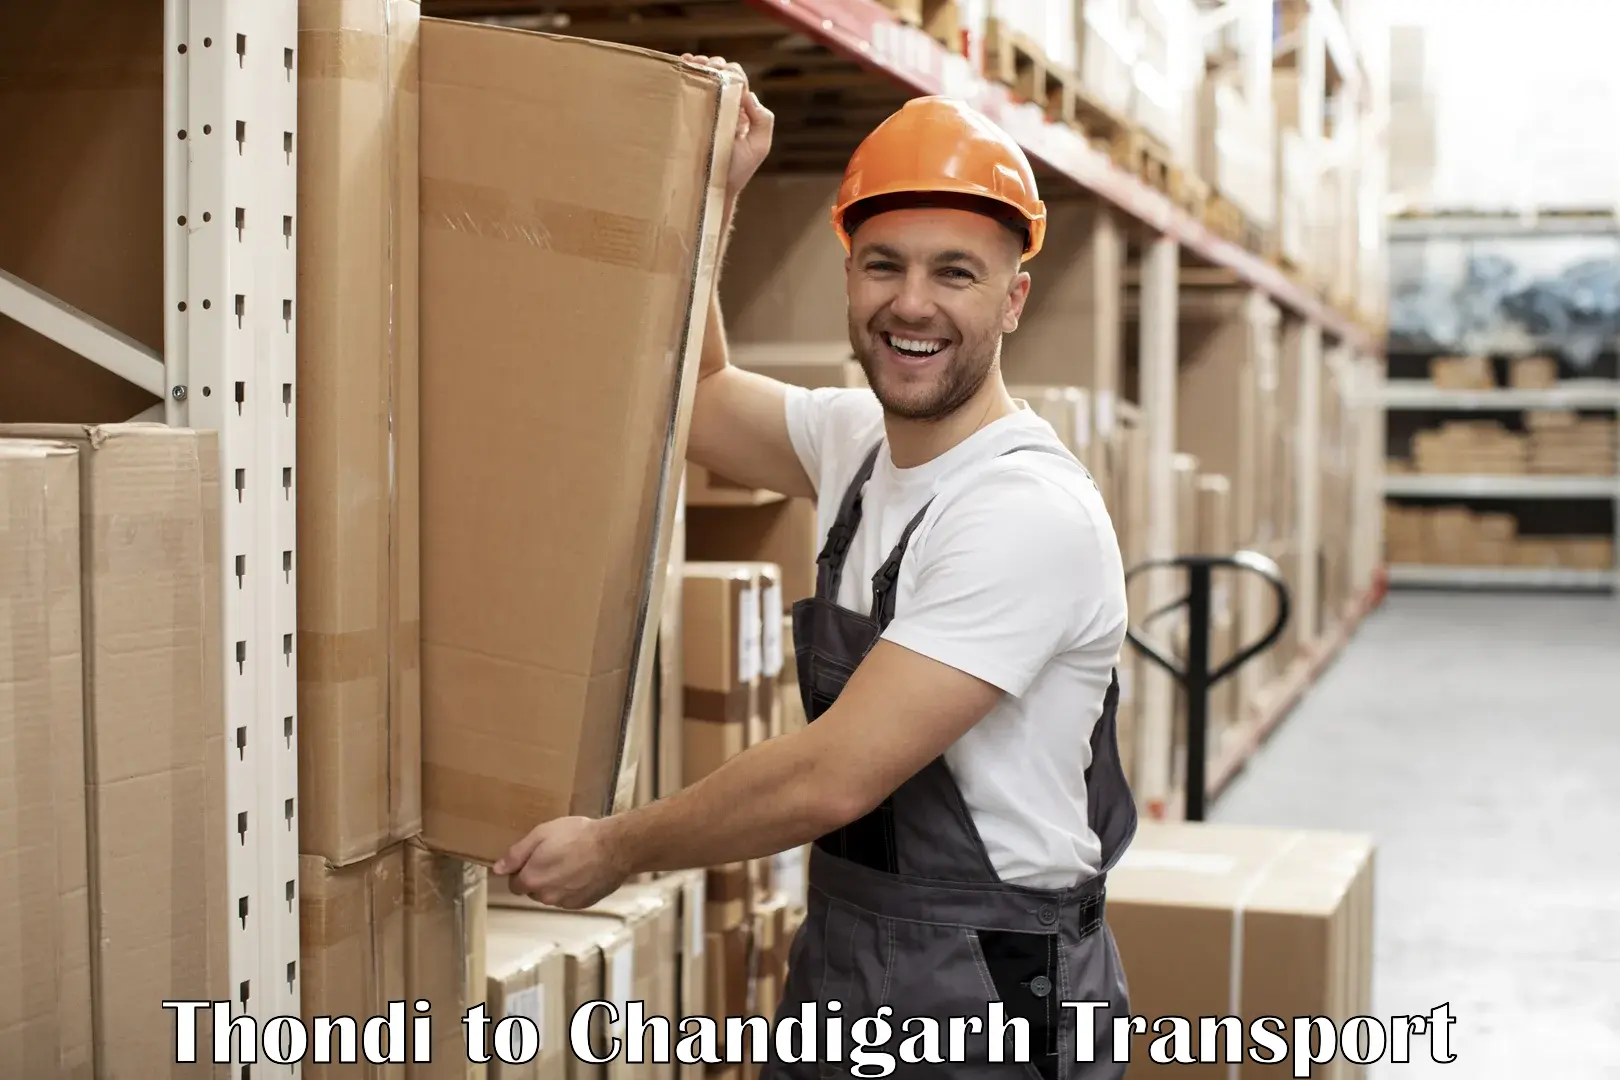 Delivery service Thondi to Chandigarh